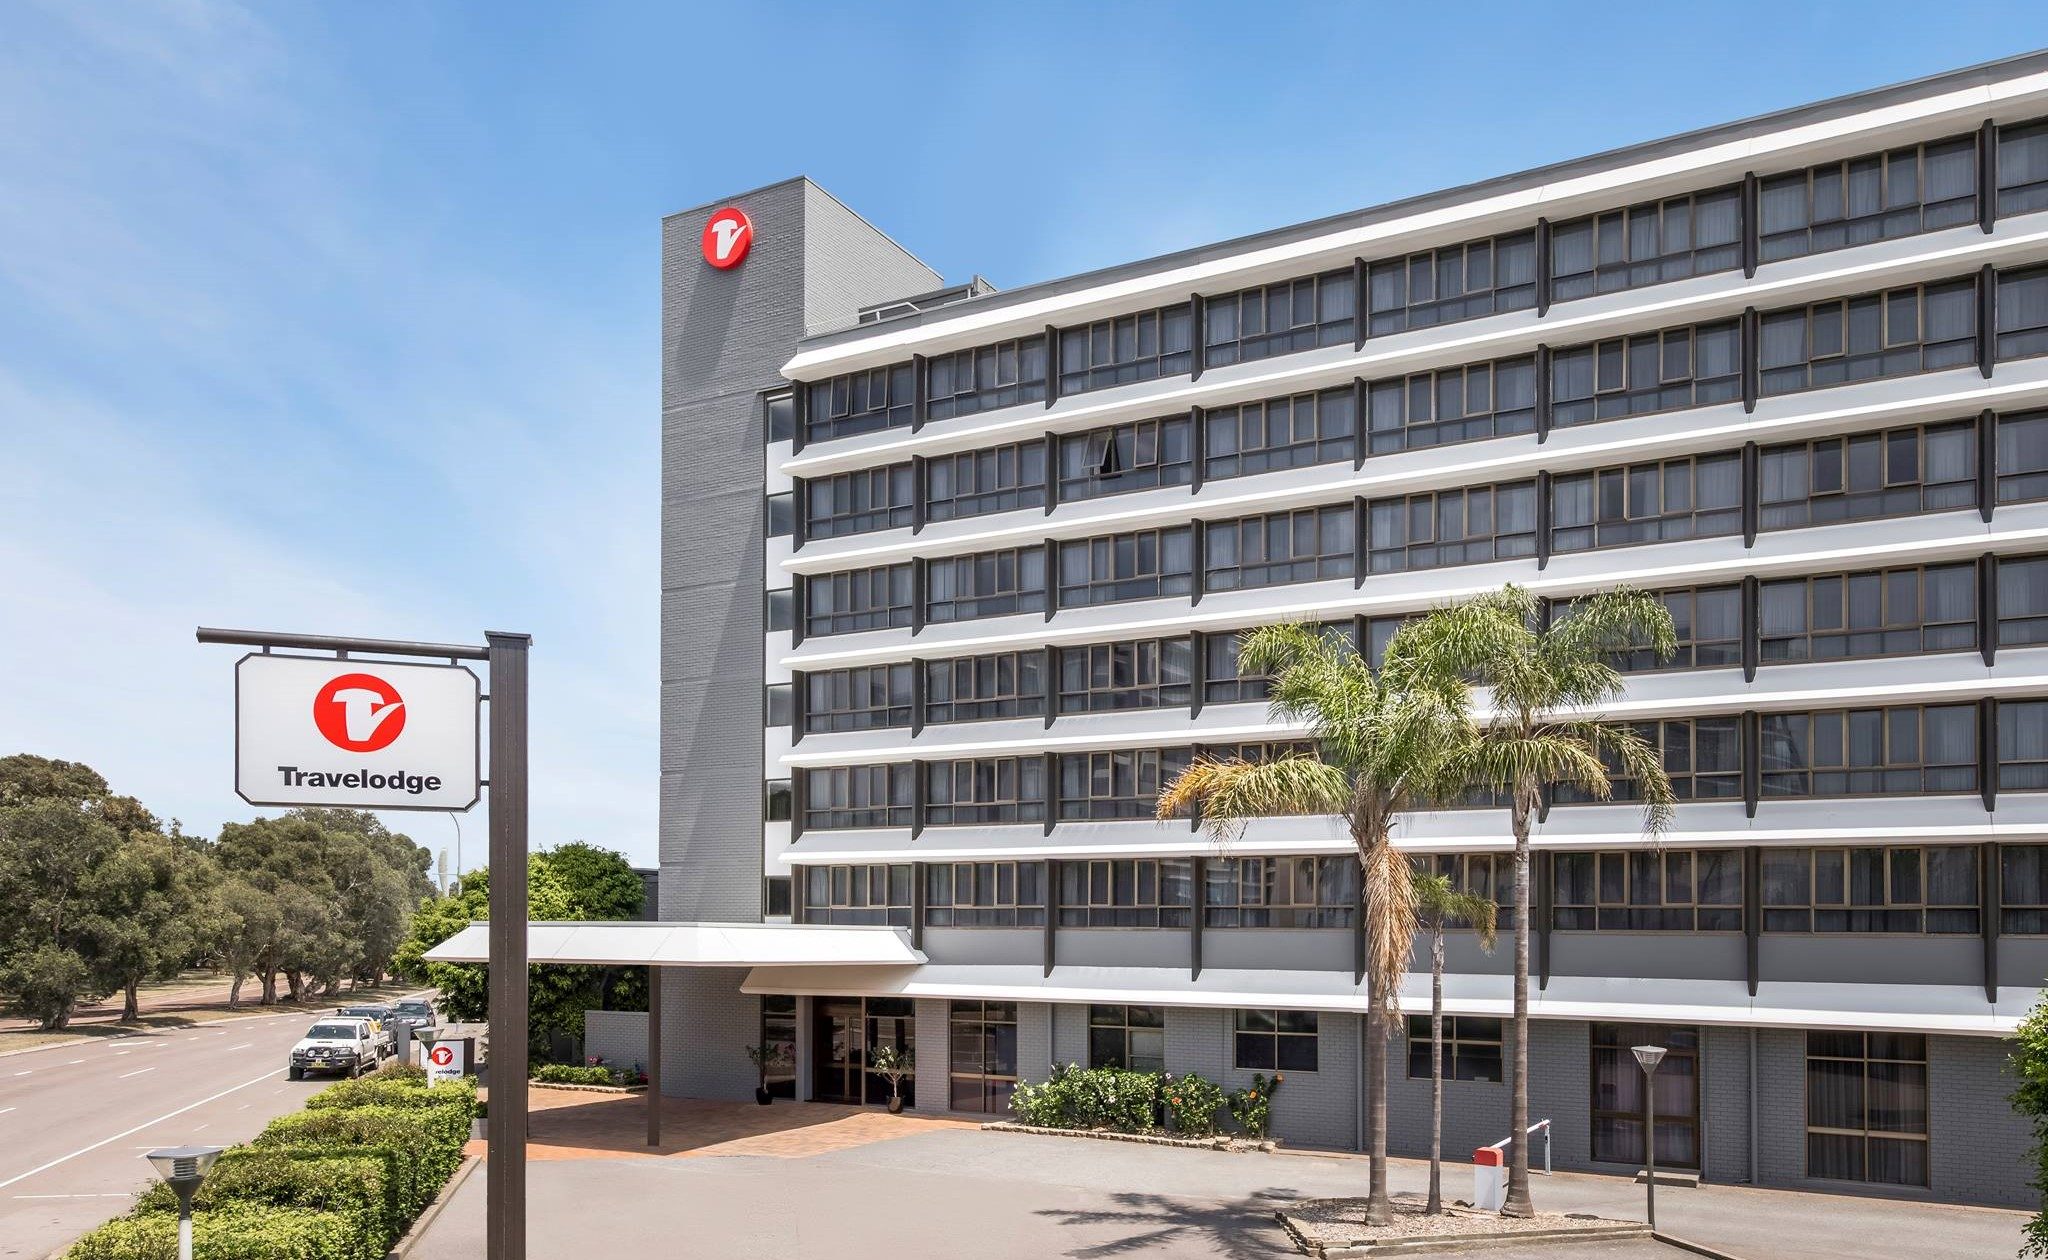 Partners Group, GIC to acquire Australia's Travelodge hotels in $457m deal